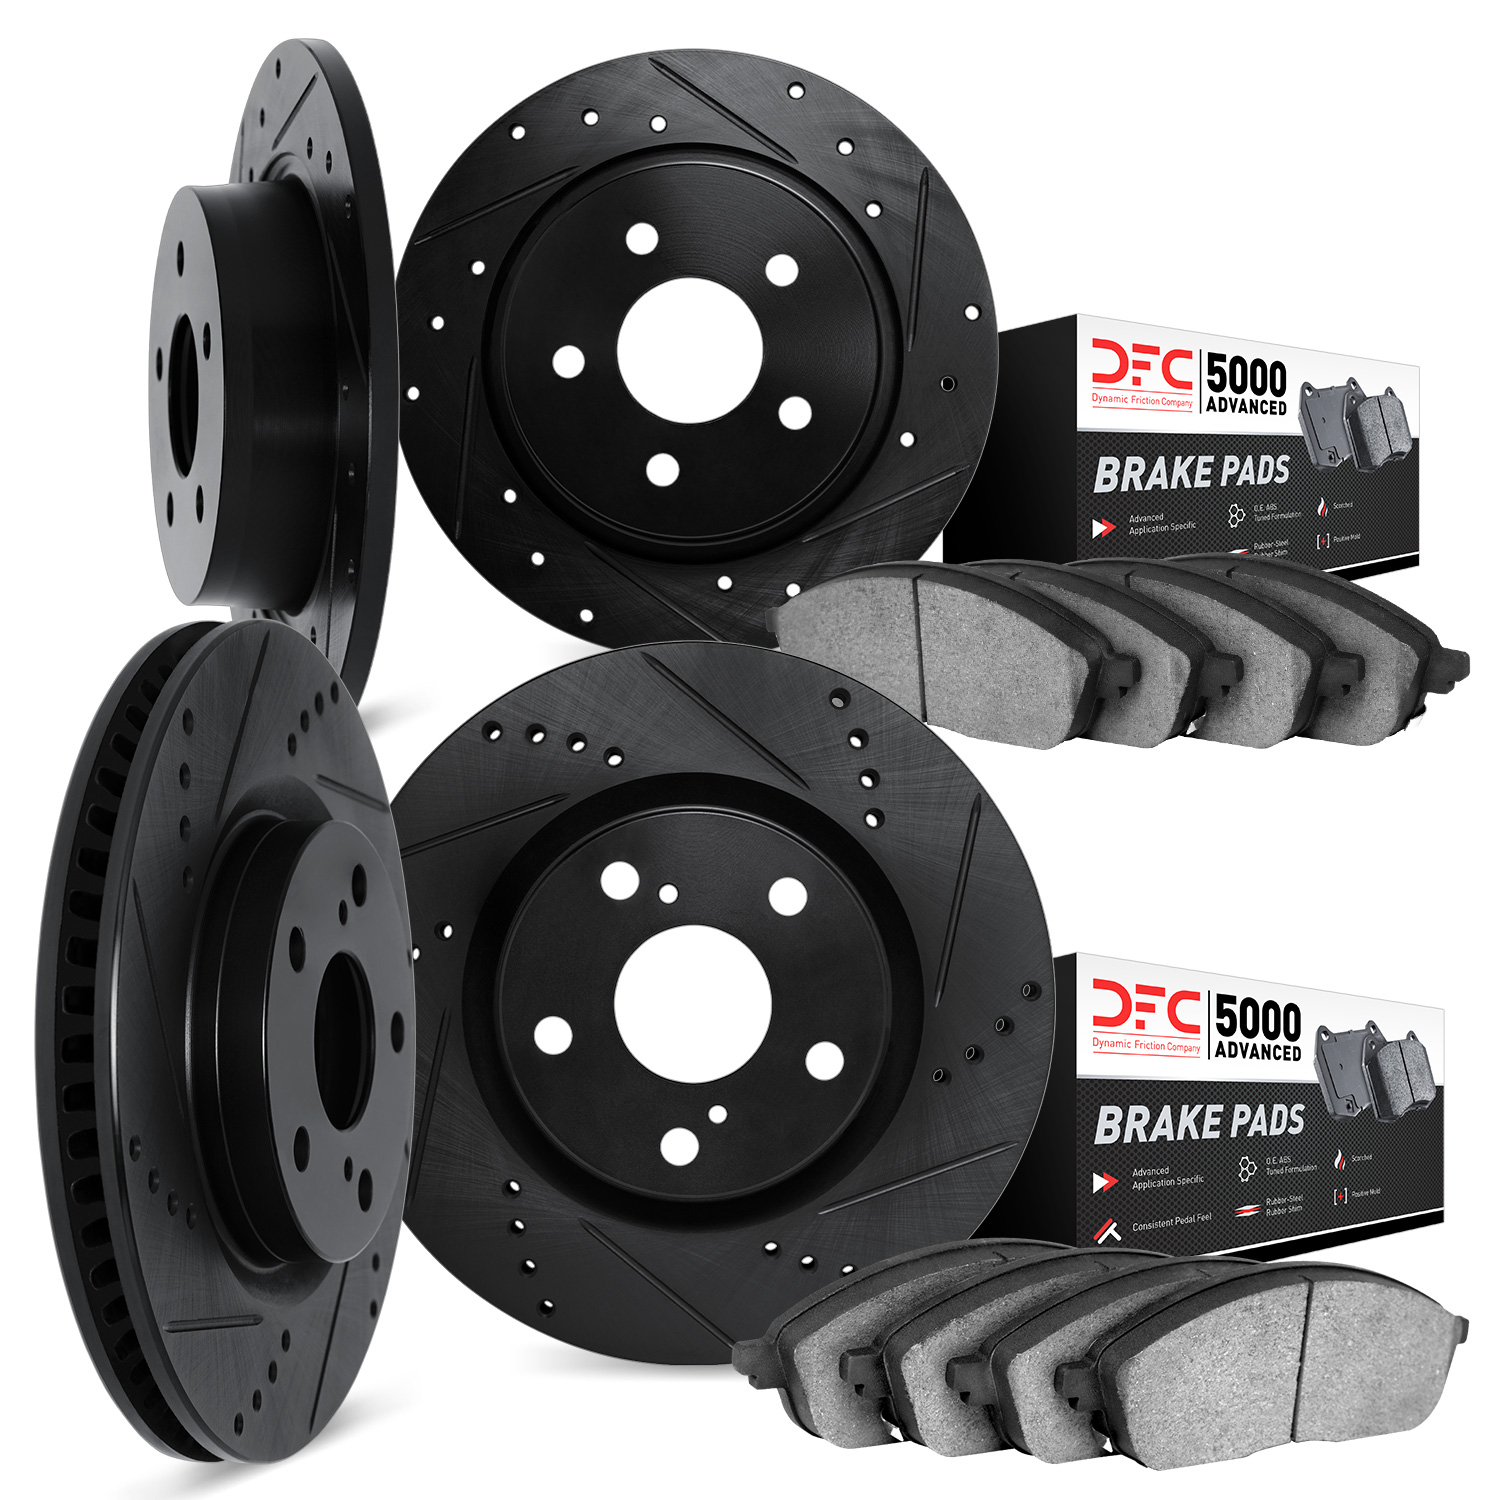 8504-39022 Drilled/Slotted Brake Rotors w/5000 Advanced Brake Pads Kit [Black], 1988-1989 GM, Position: Front and Rear